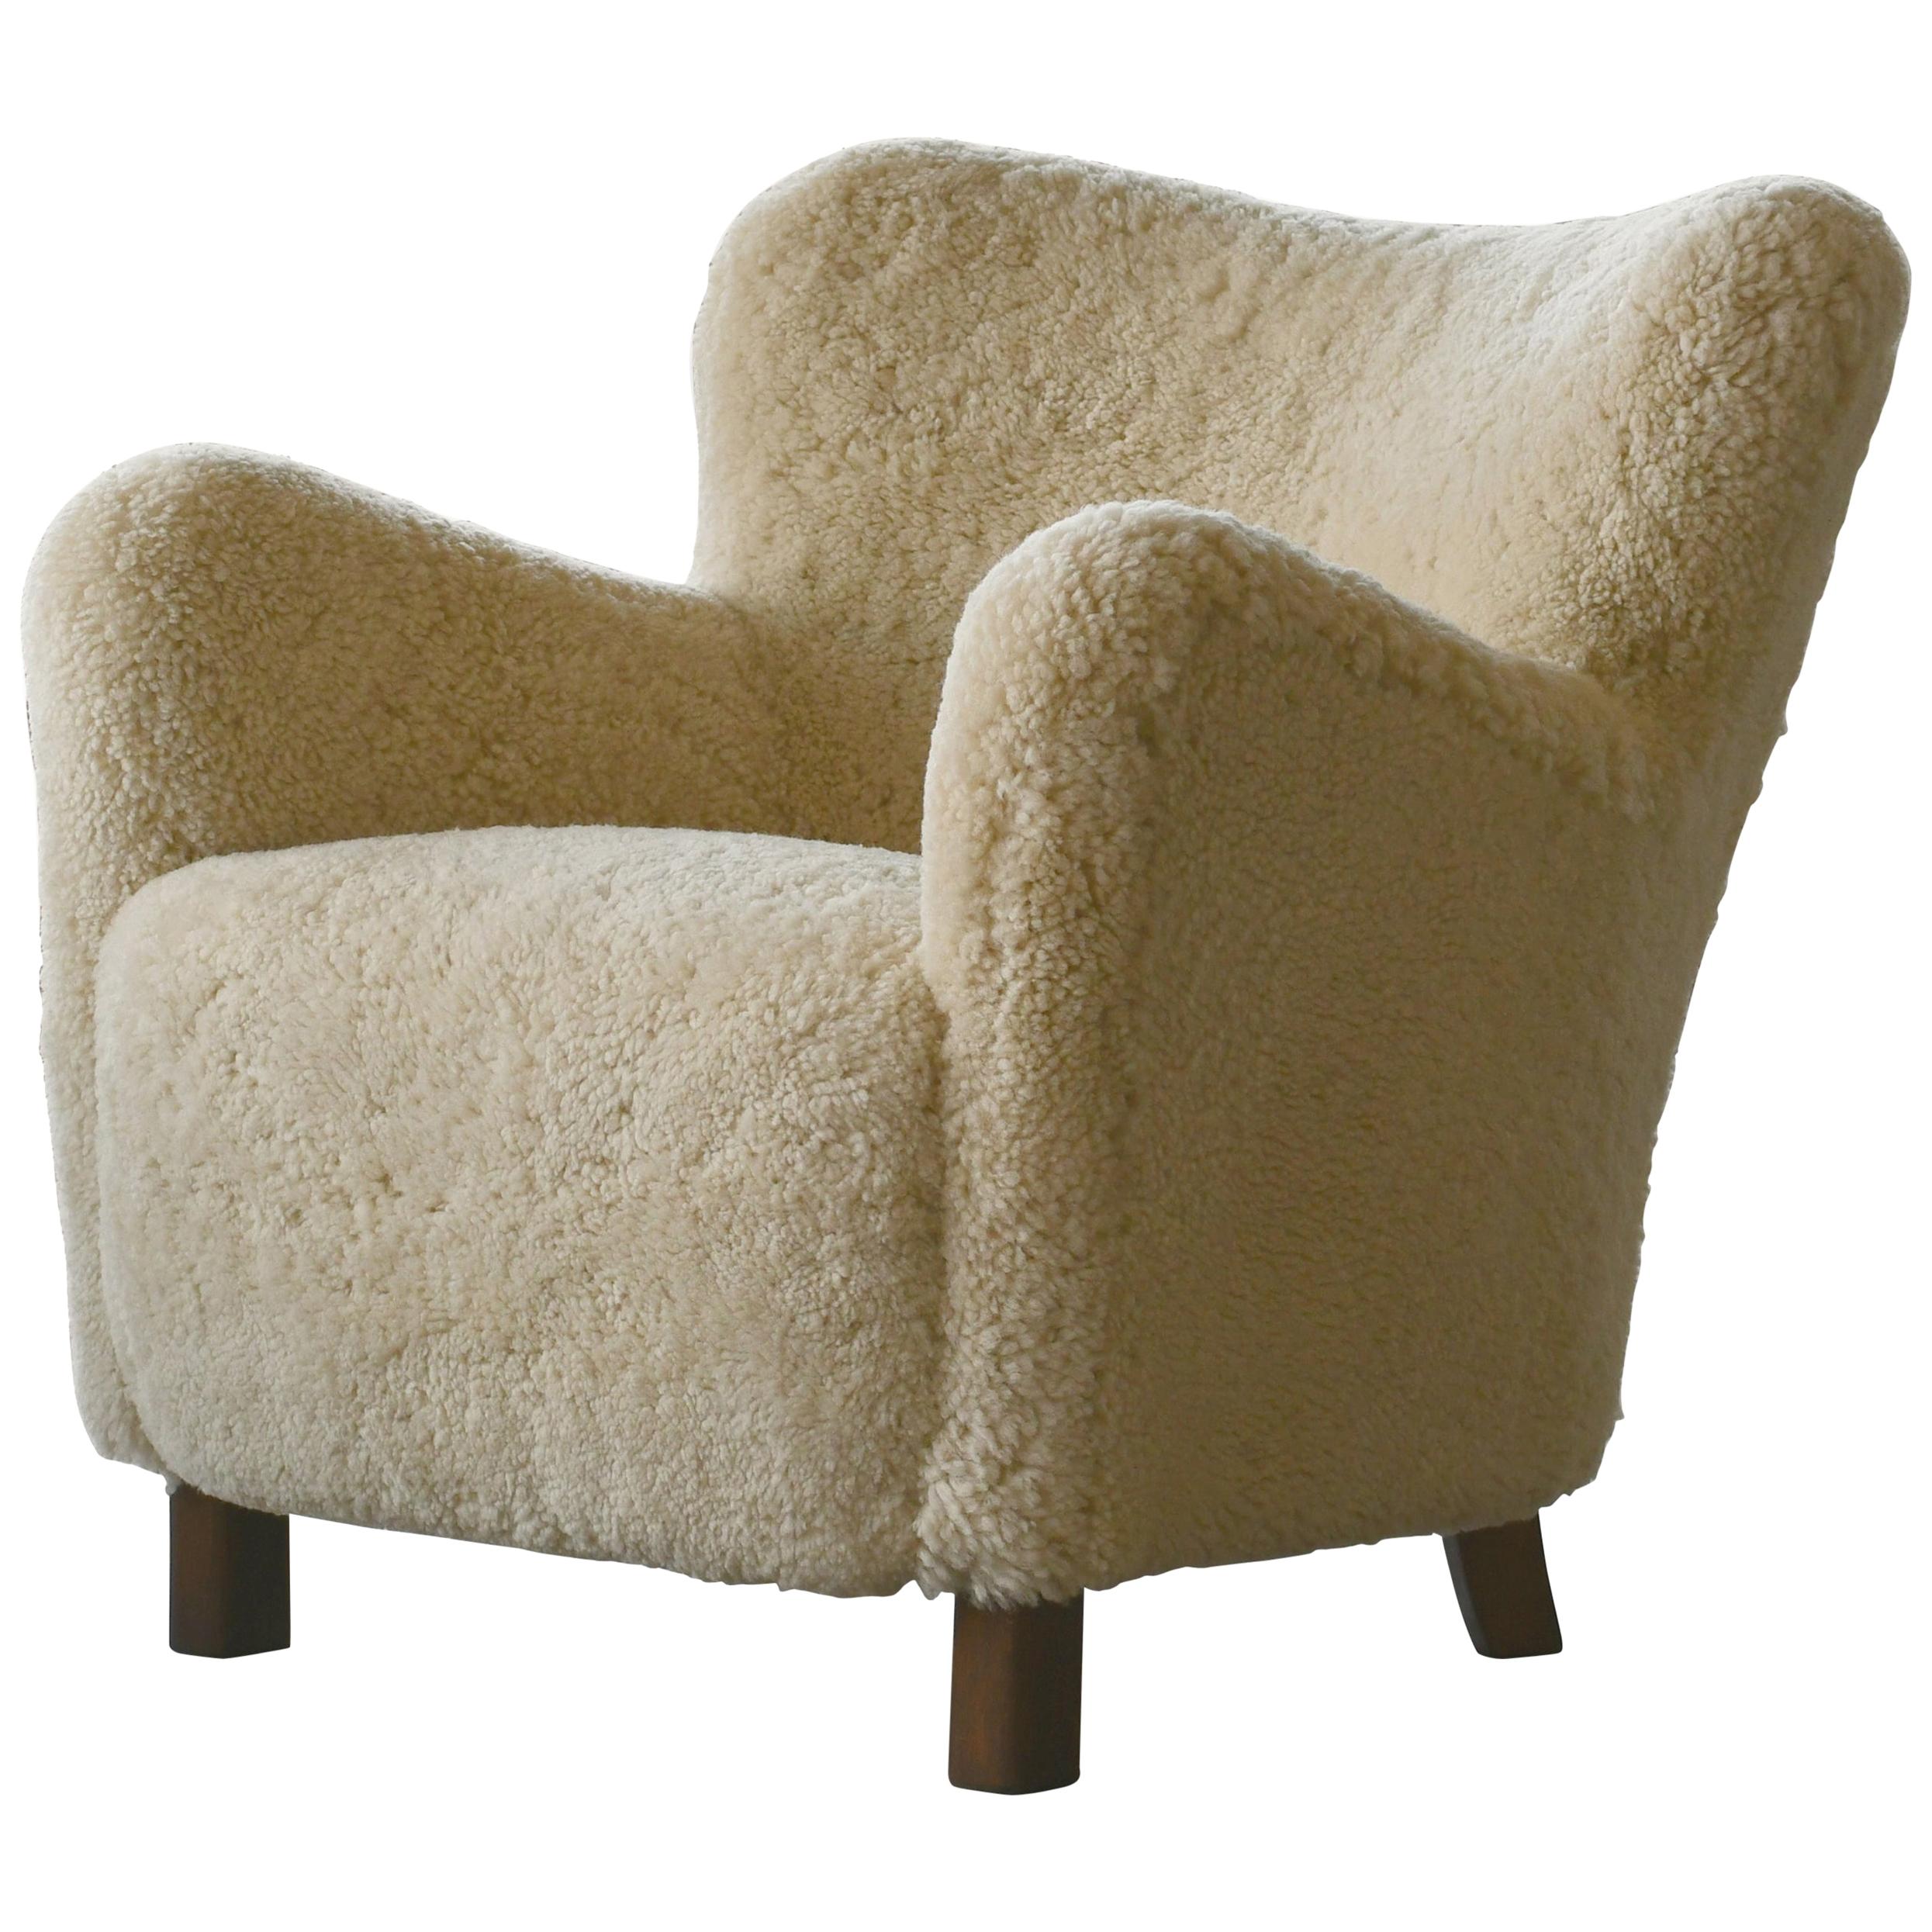 Custom Made 1940's Style Lounge Chair Upholstered in Beige Sheepskin Shearling